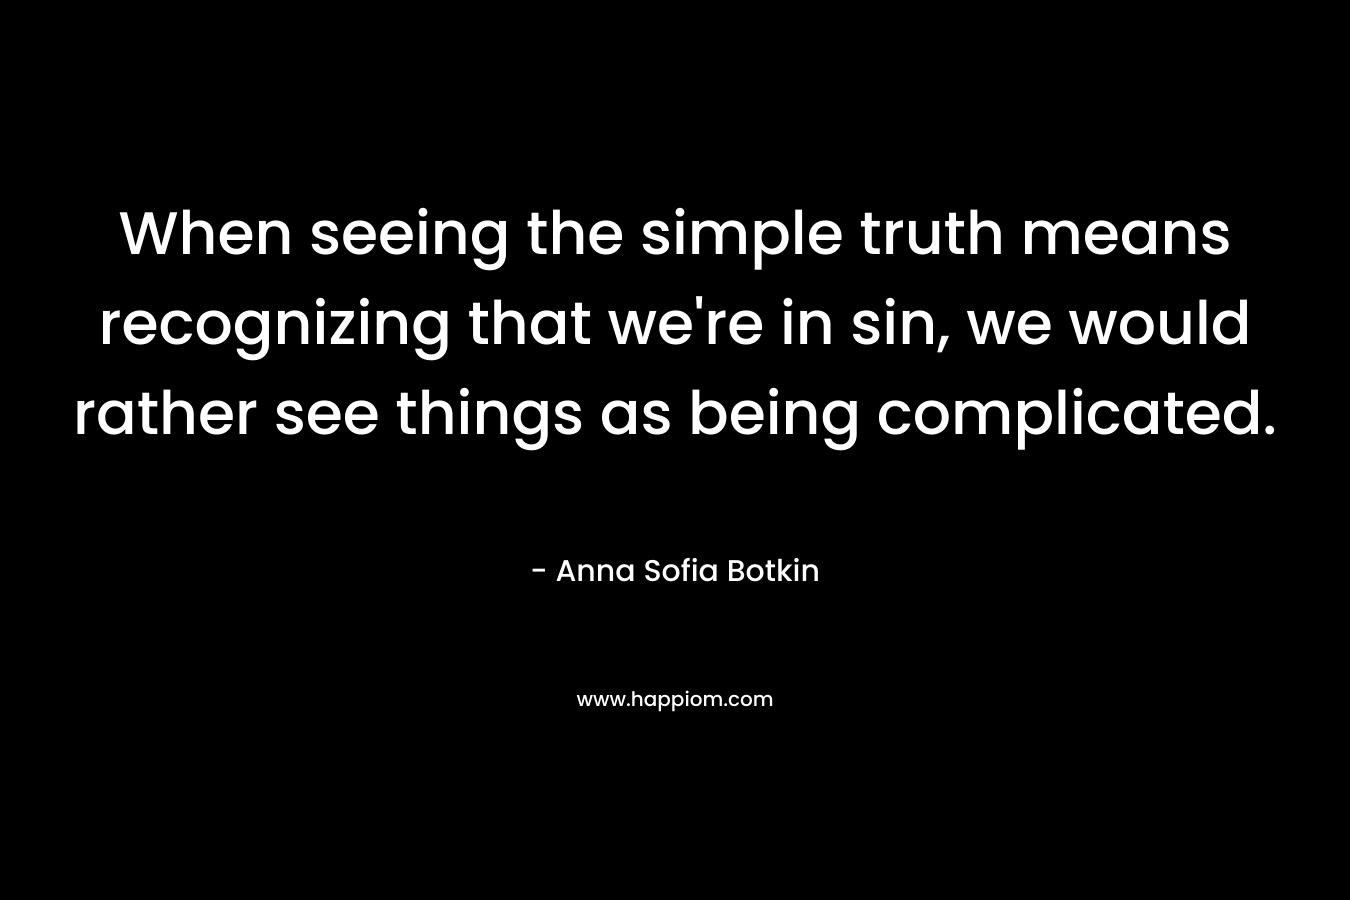 When seeing the simple truth means recognizing that we're in sin, we would rather see things as being complicated.